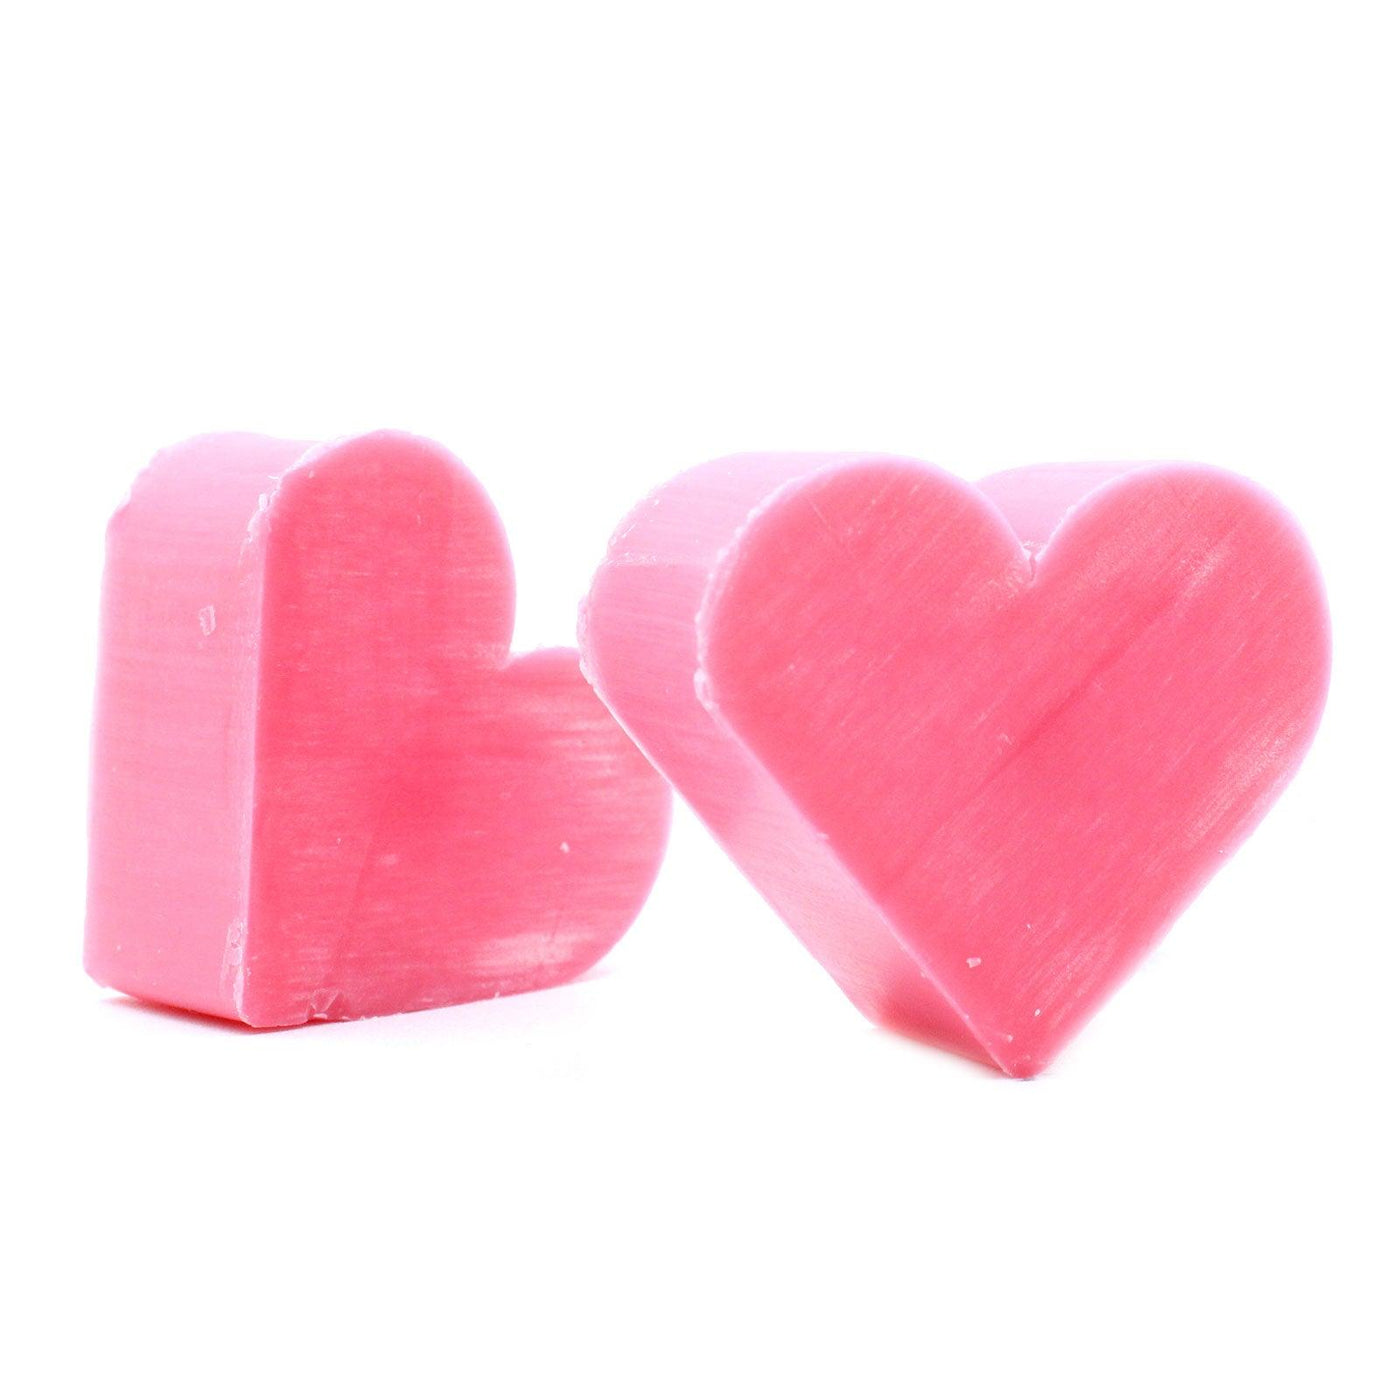 10x Pink Heart Shaped Paraben Free Fragranced Guest Soap - Wild Rose.